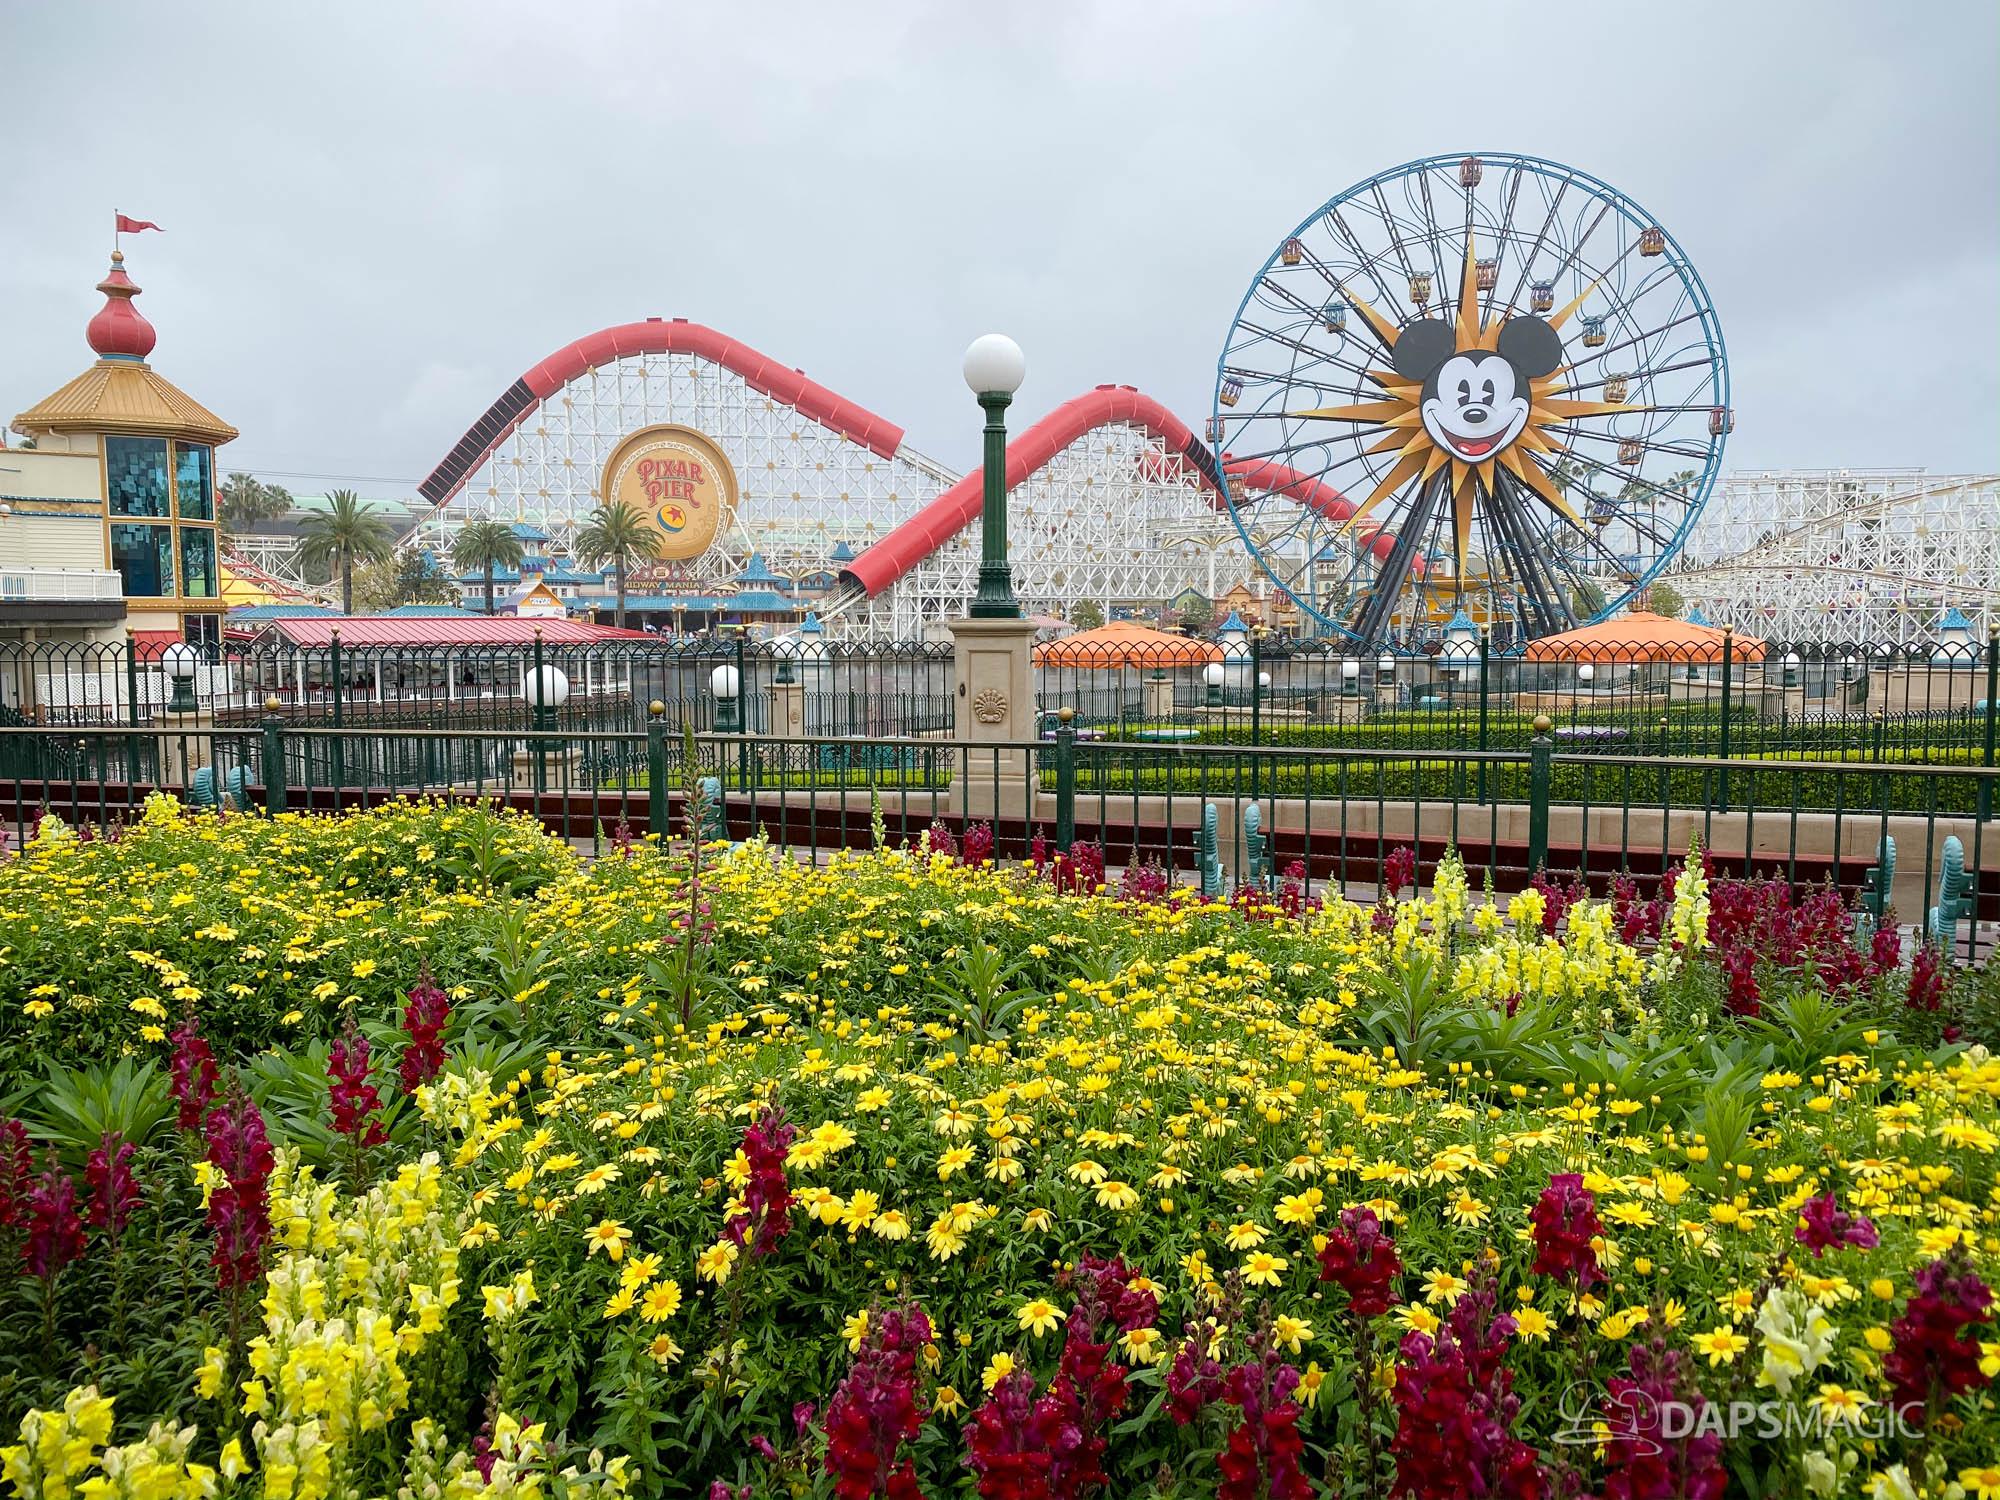 California Lifts Stay-at-Home Order – What That Could Mean For Theme Parks